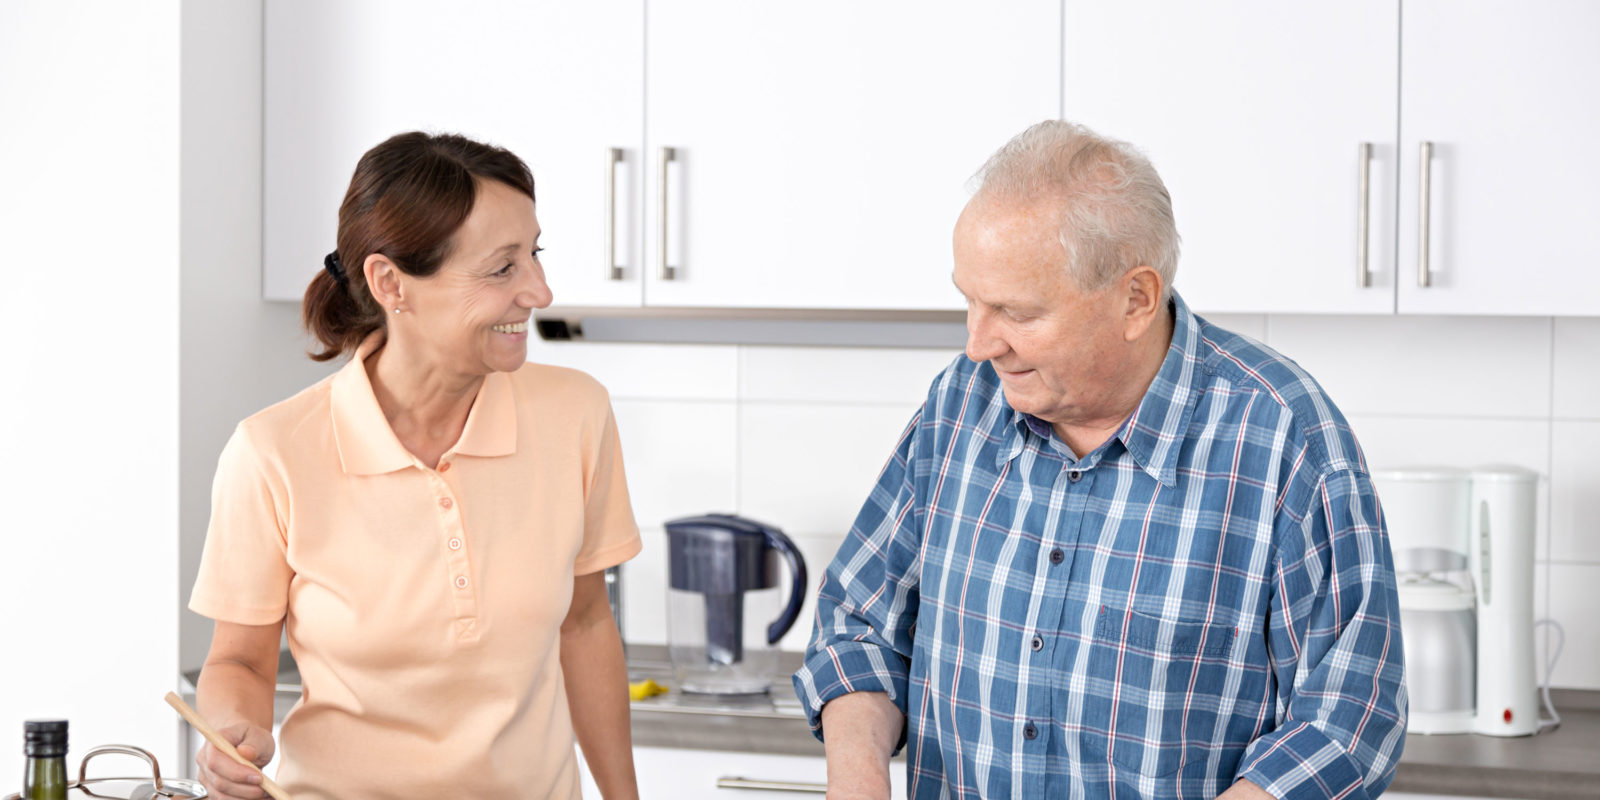 Home caregiver with senior man in a kitchen